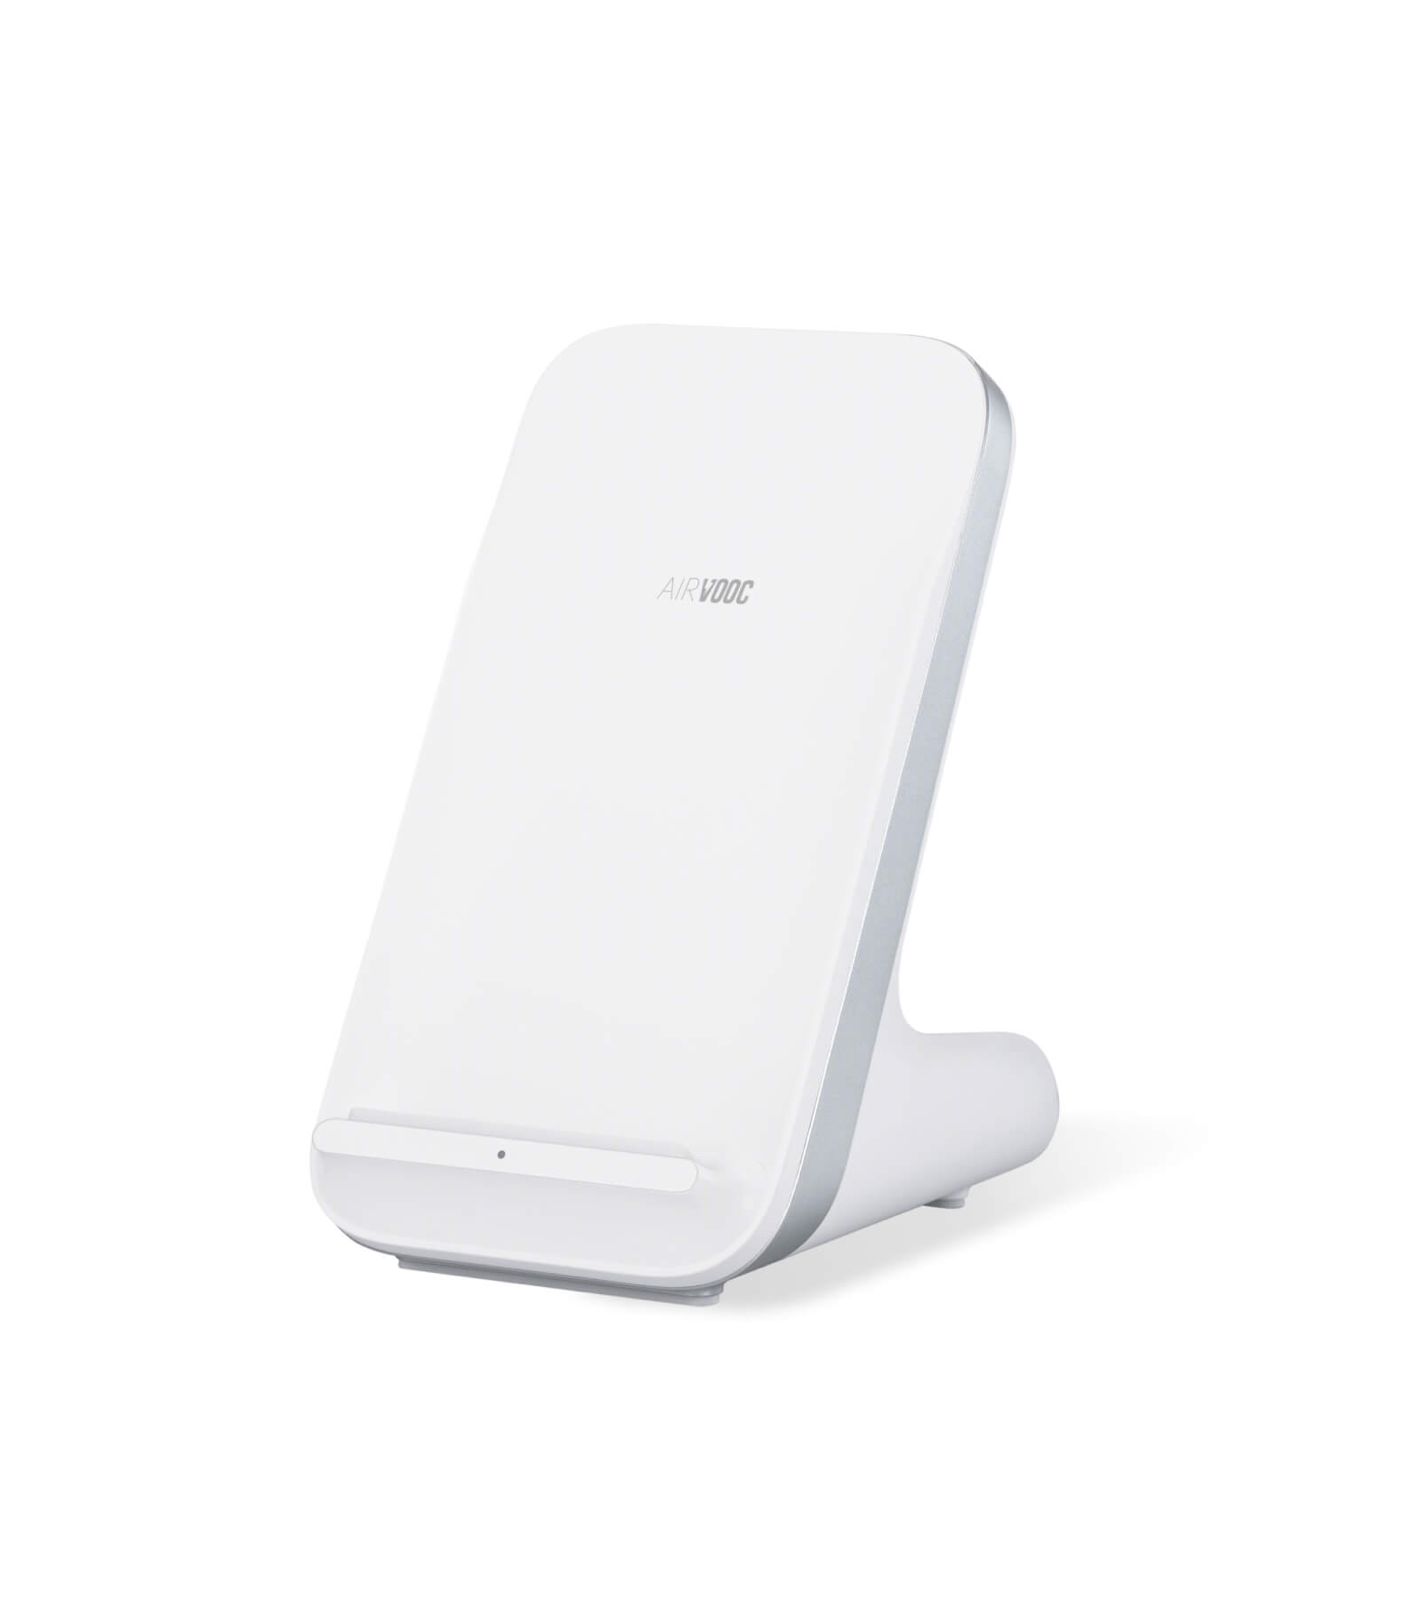 AIRVOOC 50W charger boasts impressive speed